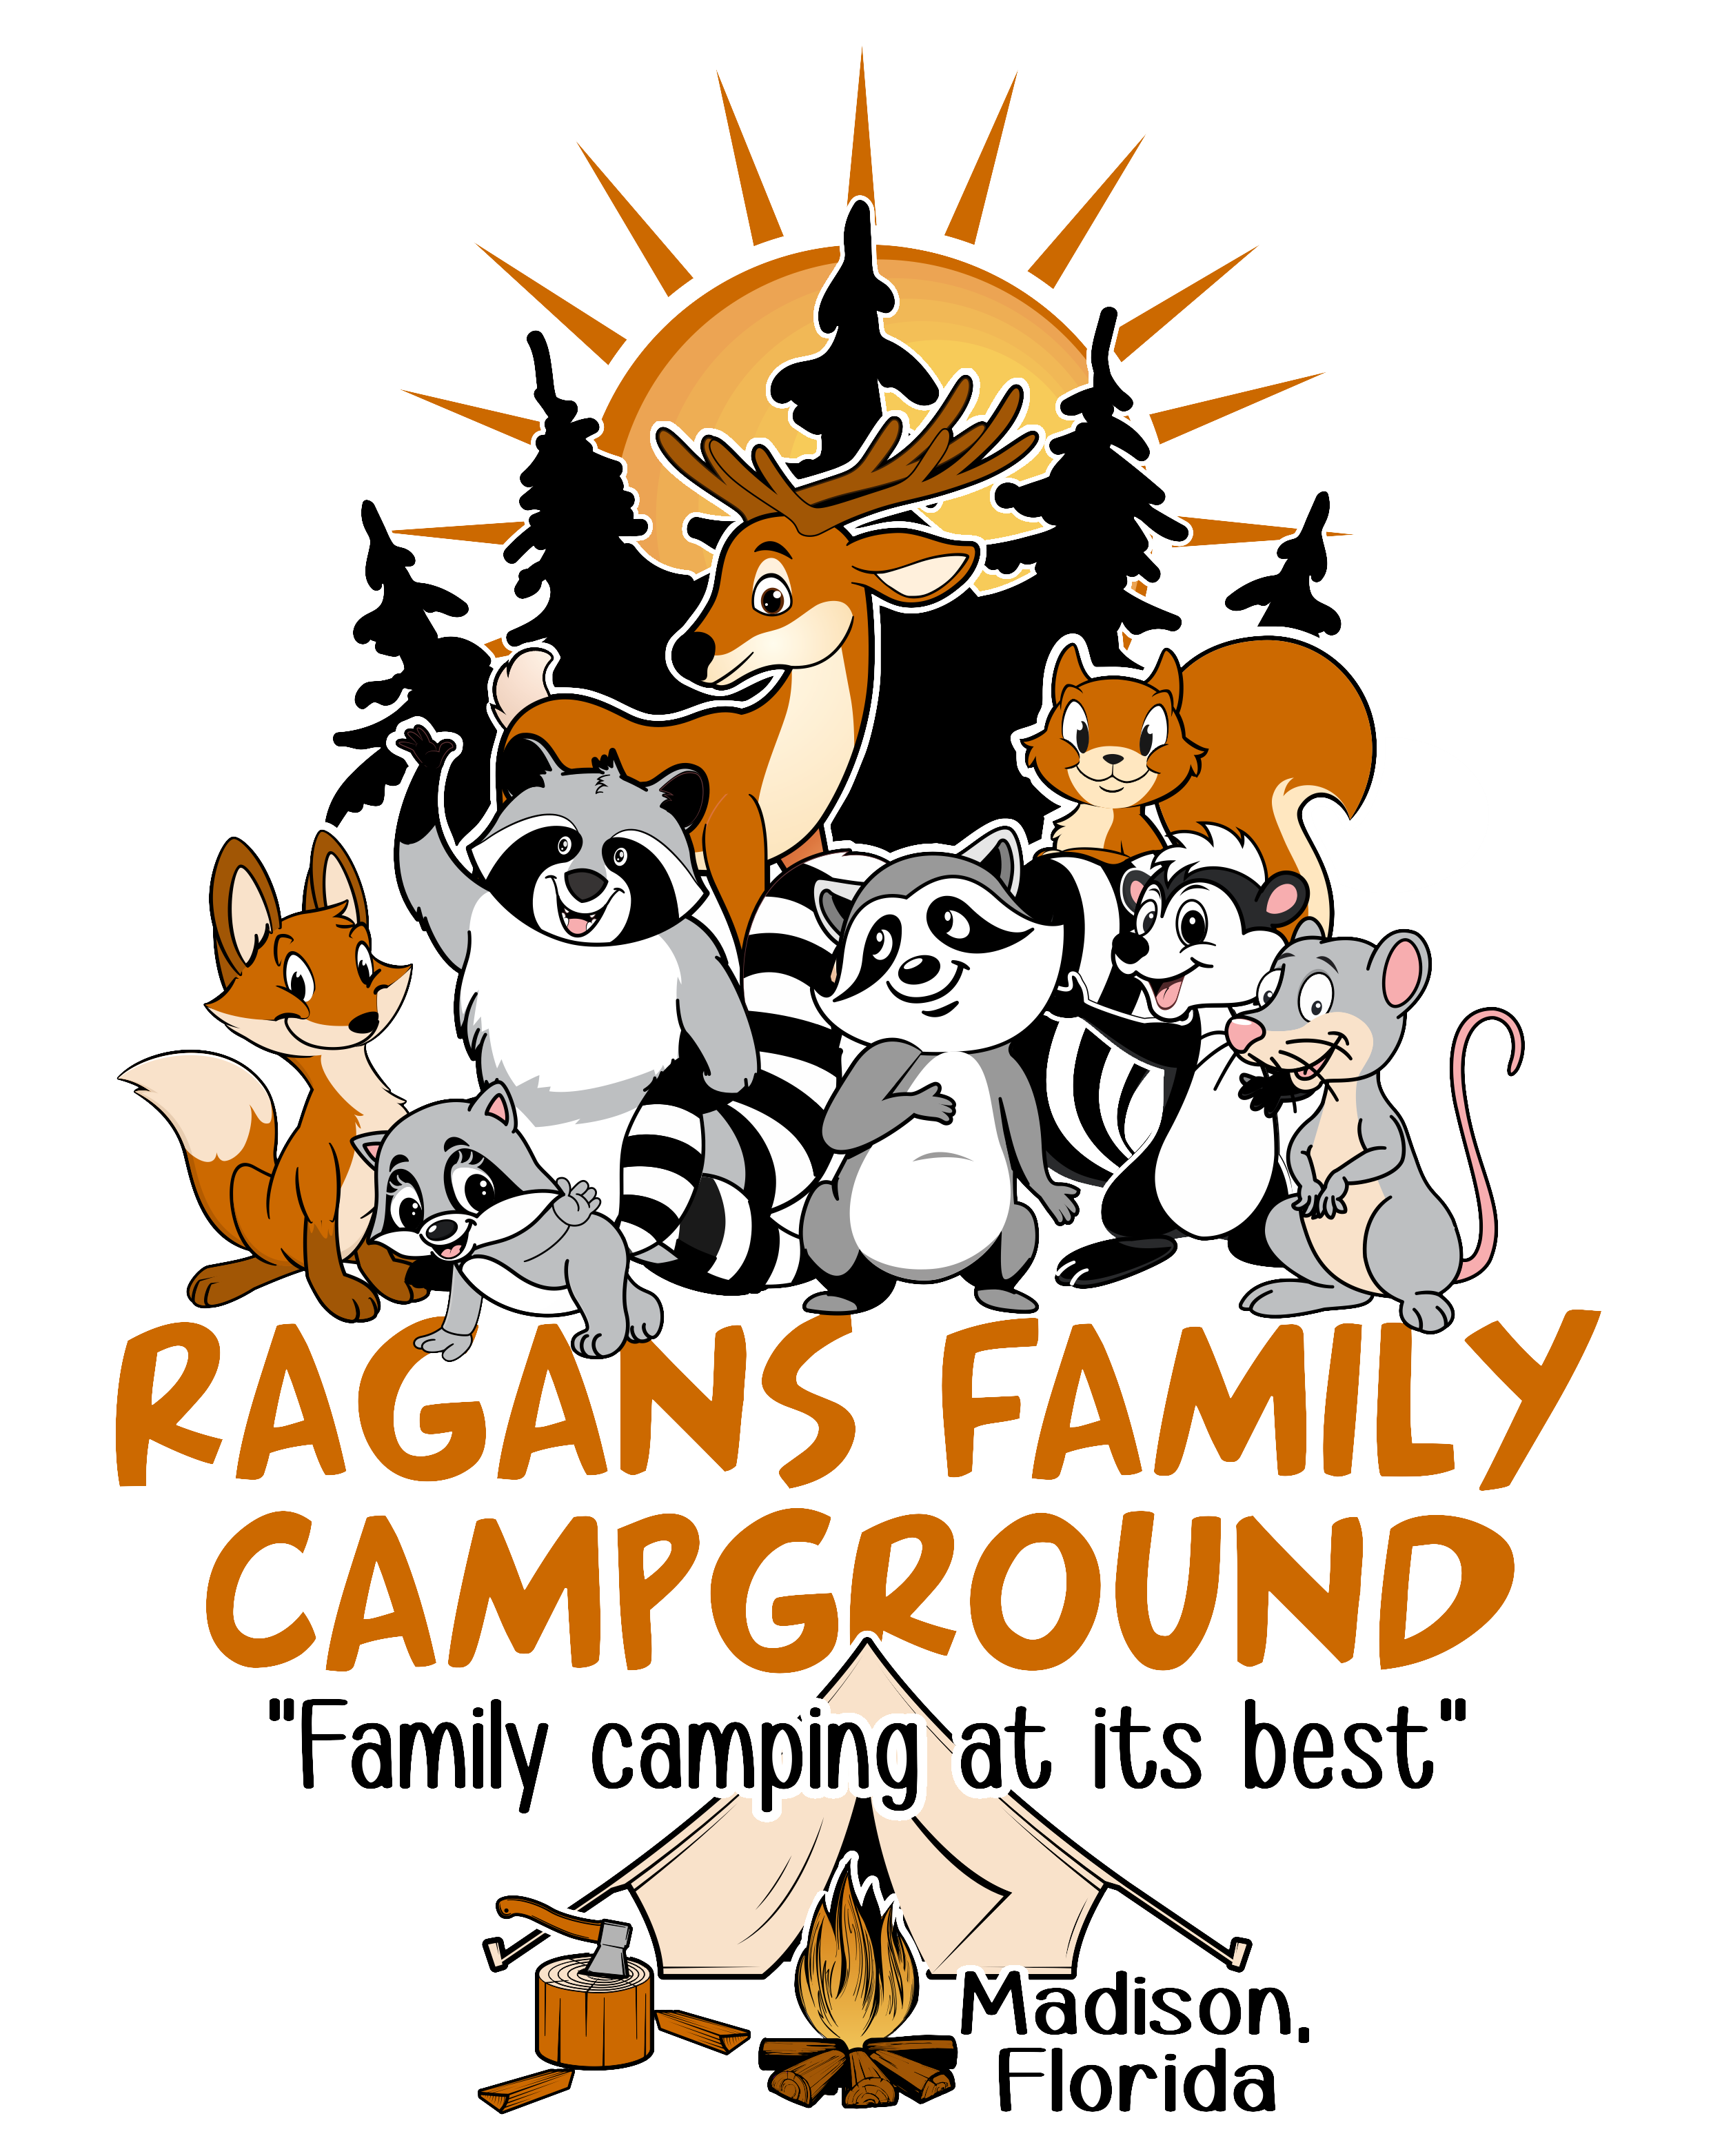 ragans family campground is family camping at its best